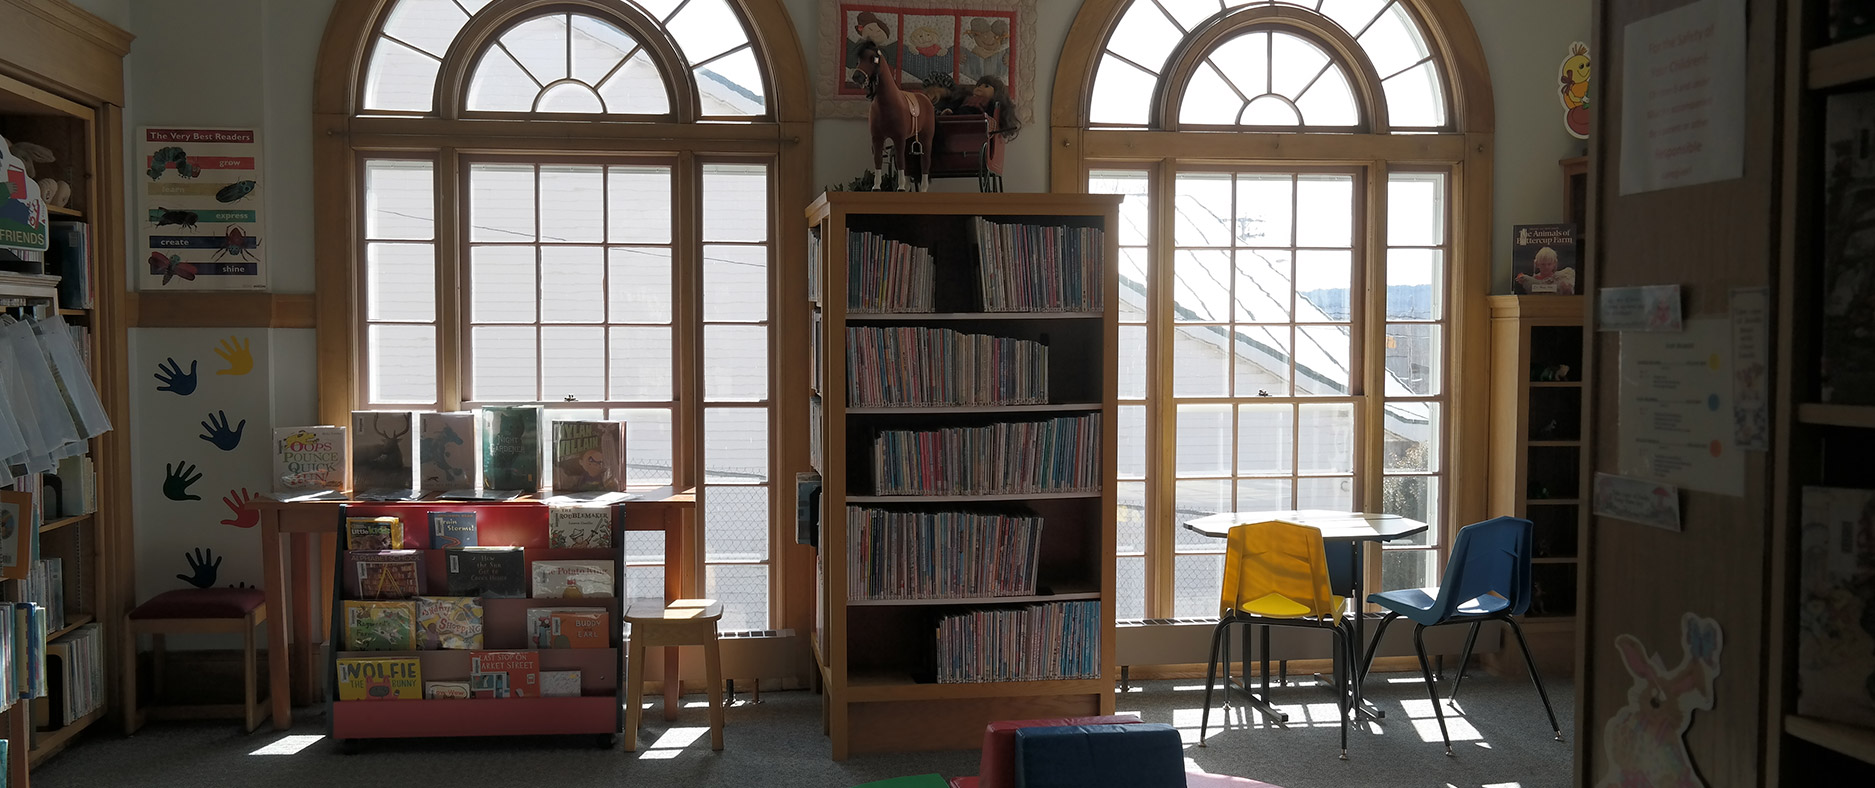 Picture of Inside_JayNilesLibrary